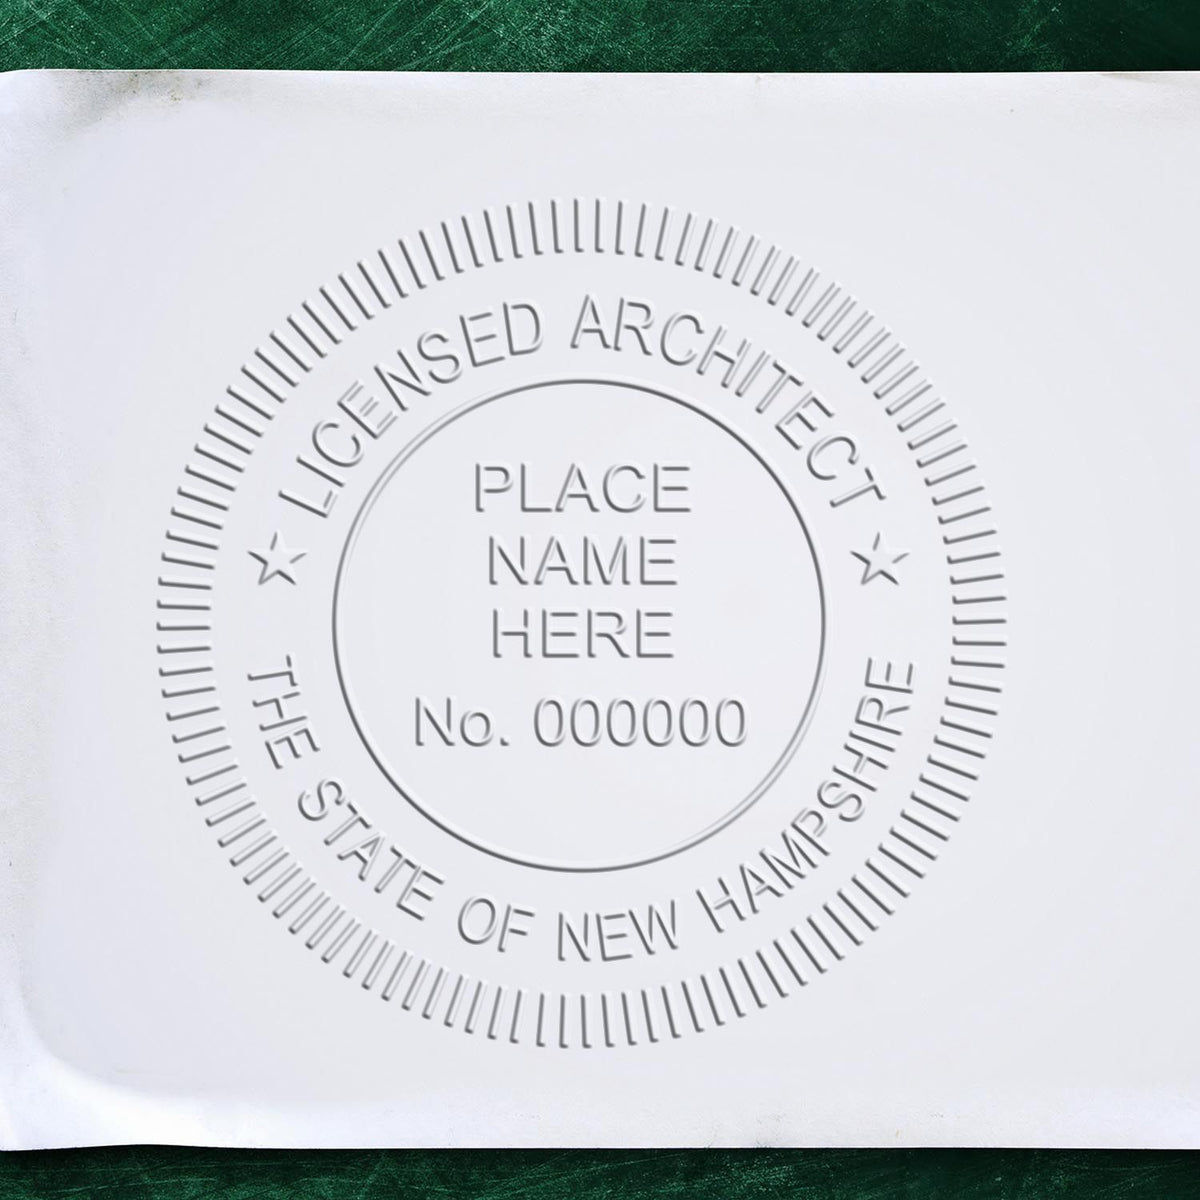 A stamped impression of the New Hampshire Desk Architect Embossing Seal in this stylish lifestyle photo, setting the tone for a unique and personalized product.